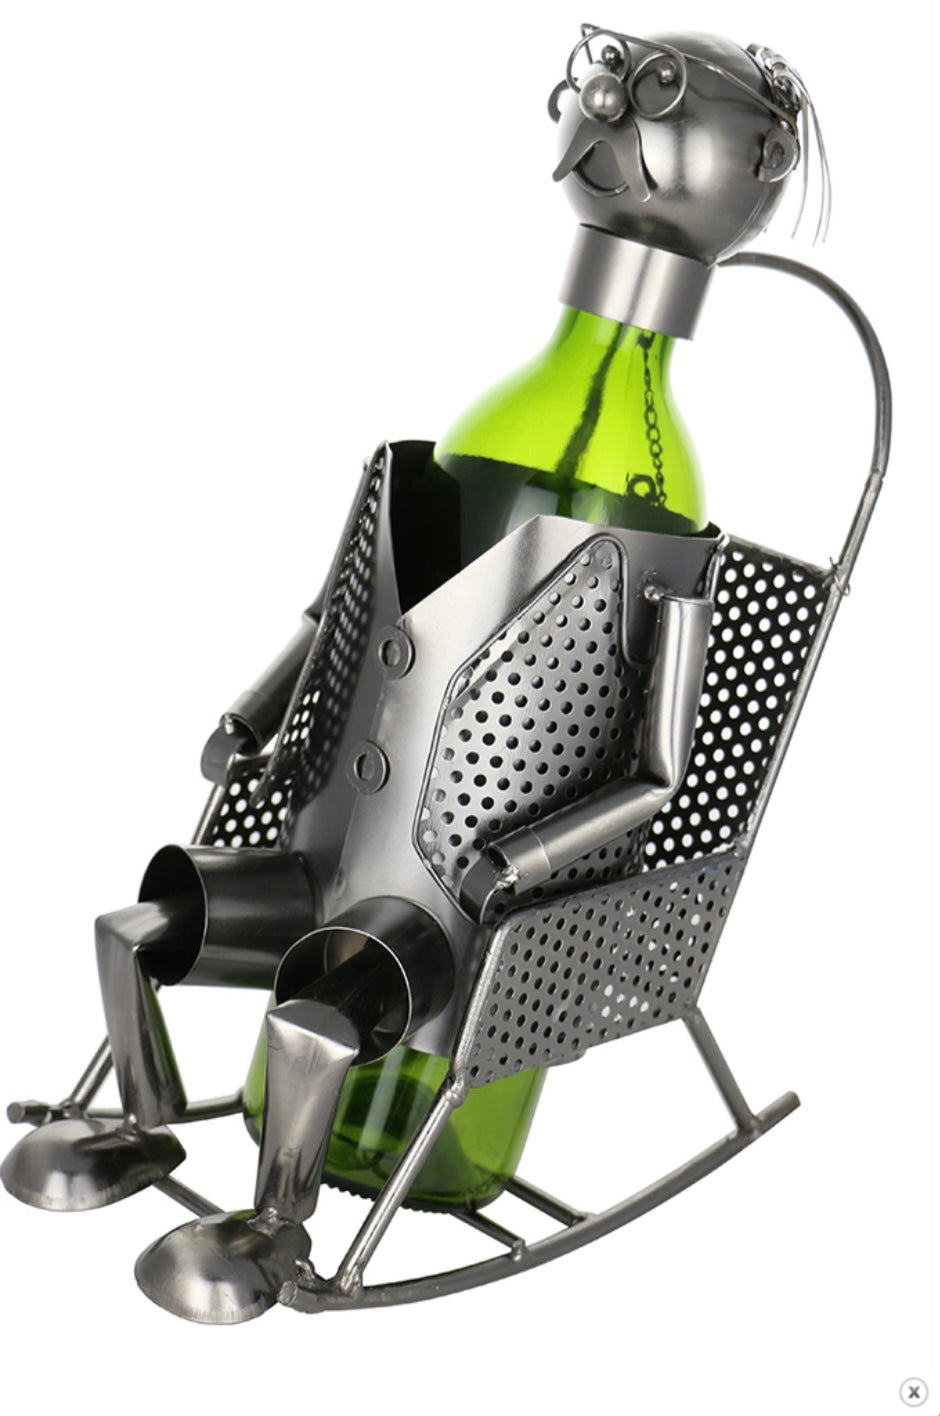 Man In Rocking Chair Bottle Holder product image features a man in a rocking chair wine bottle holder.  Made of recycle metal.  Color is pewter.  Measures 12" X 8".  Bottle not included.Measu